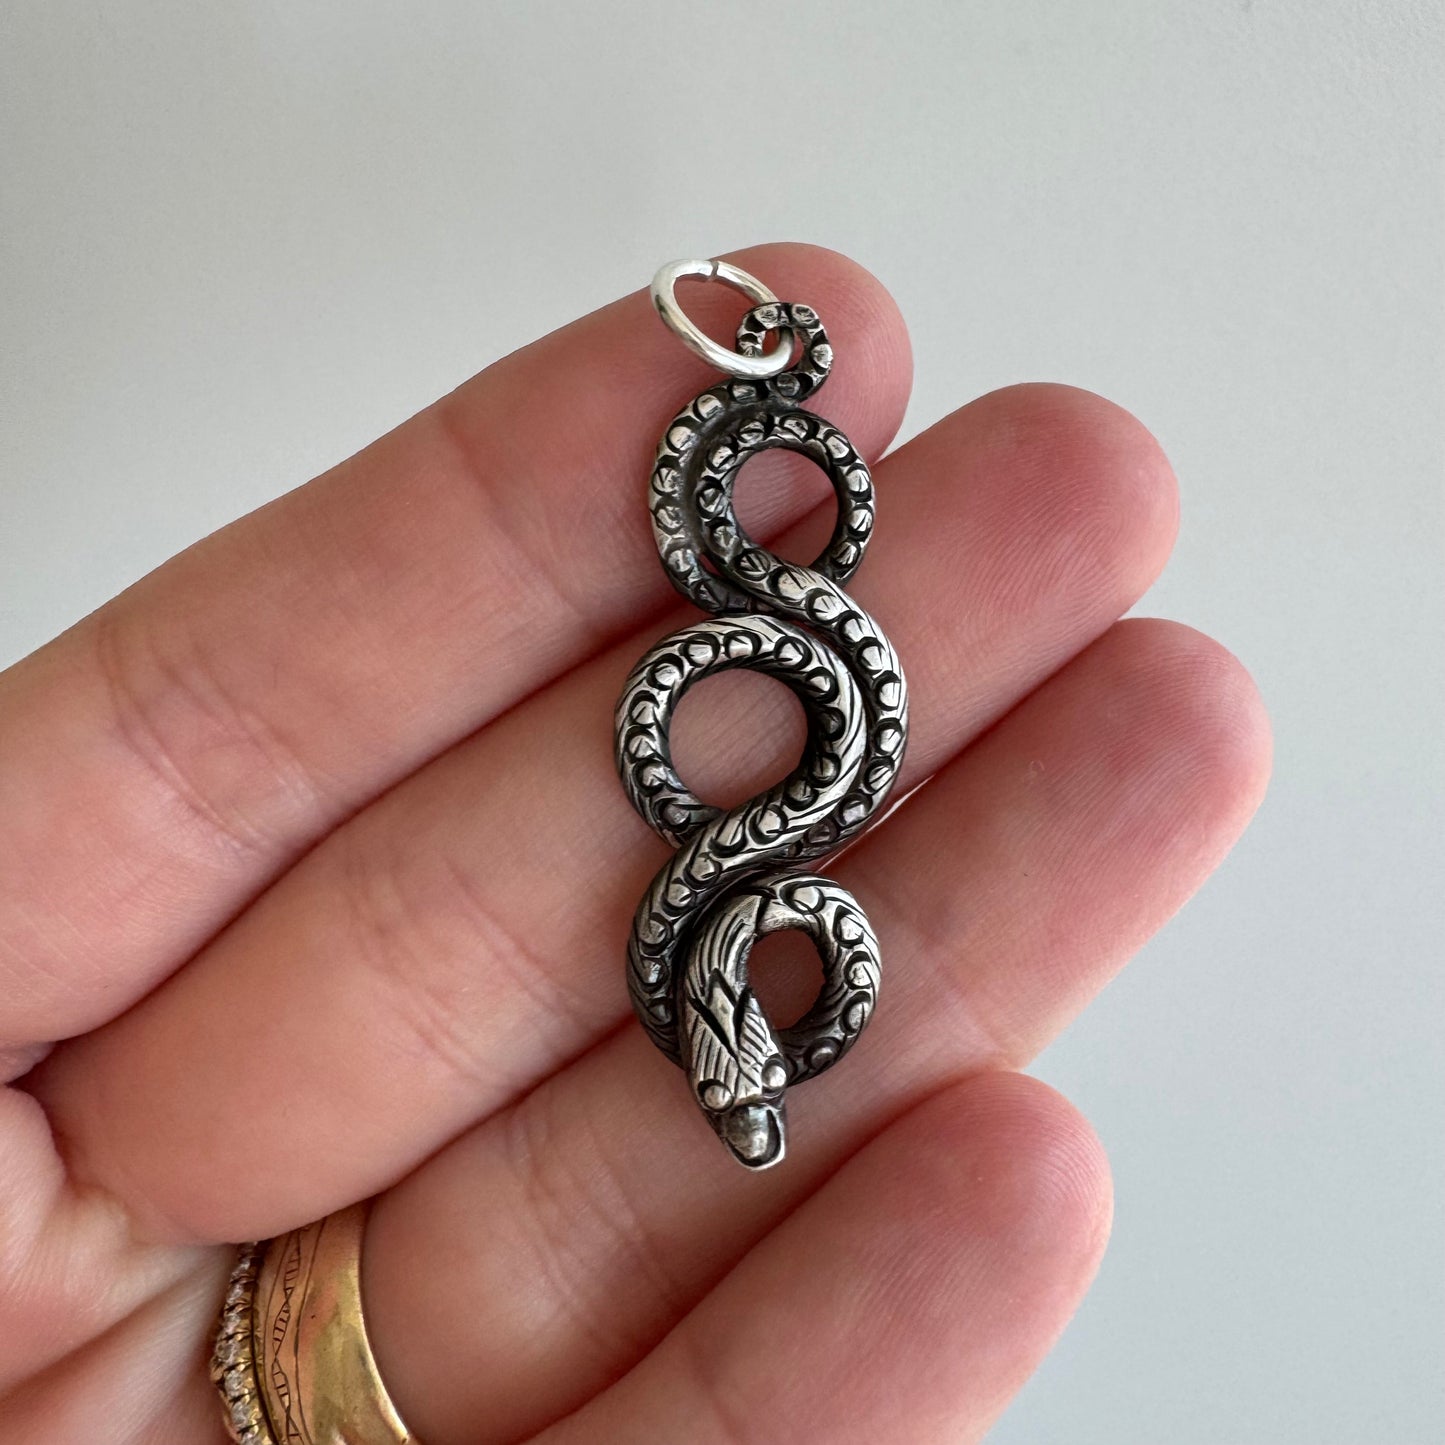 V I N T A G E // looping snake / sterling silver stamped and engraved snake / a pendant